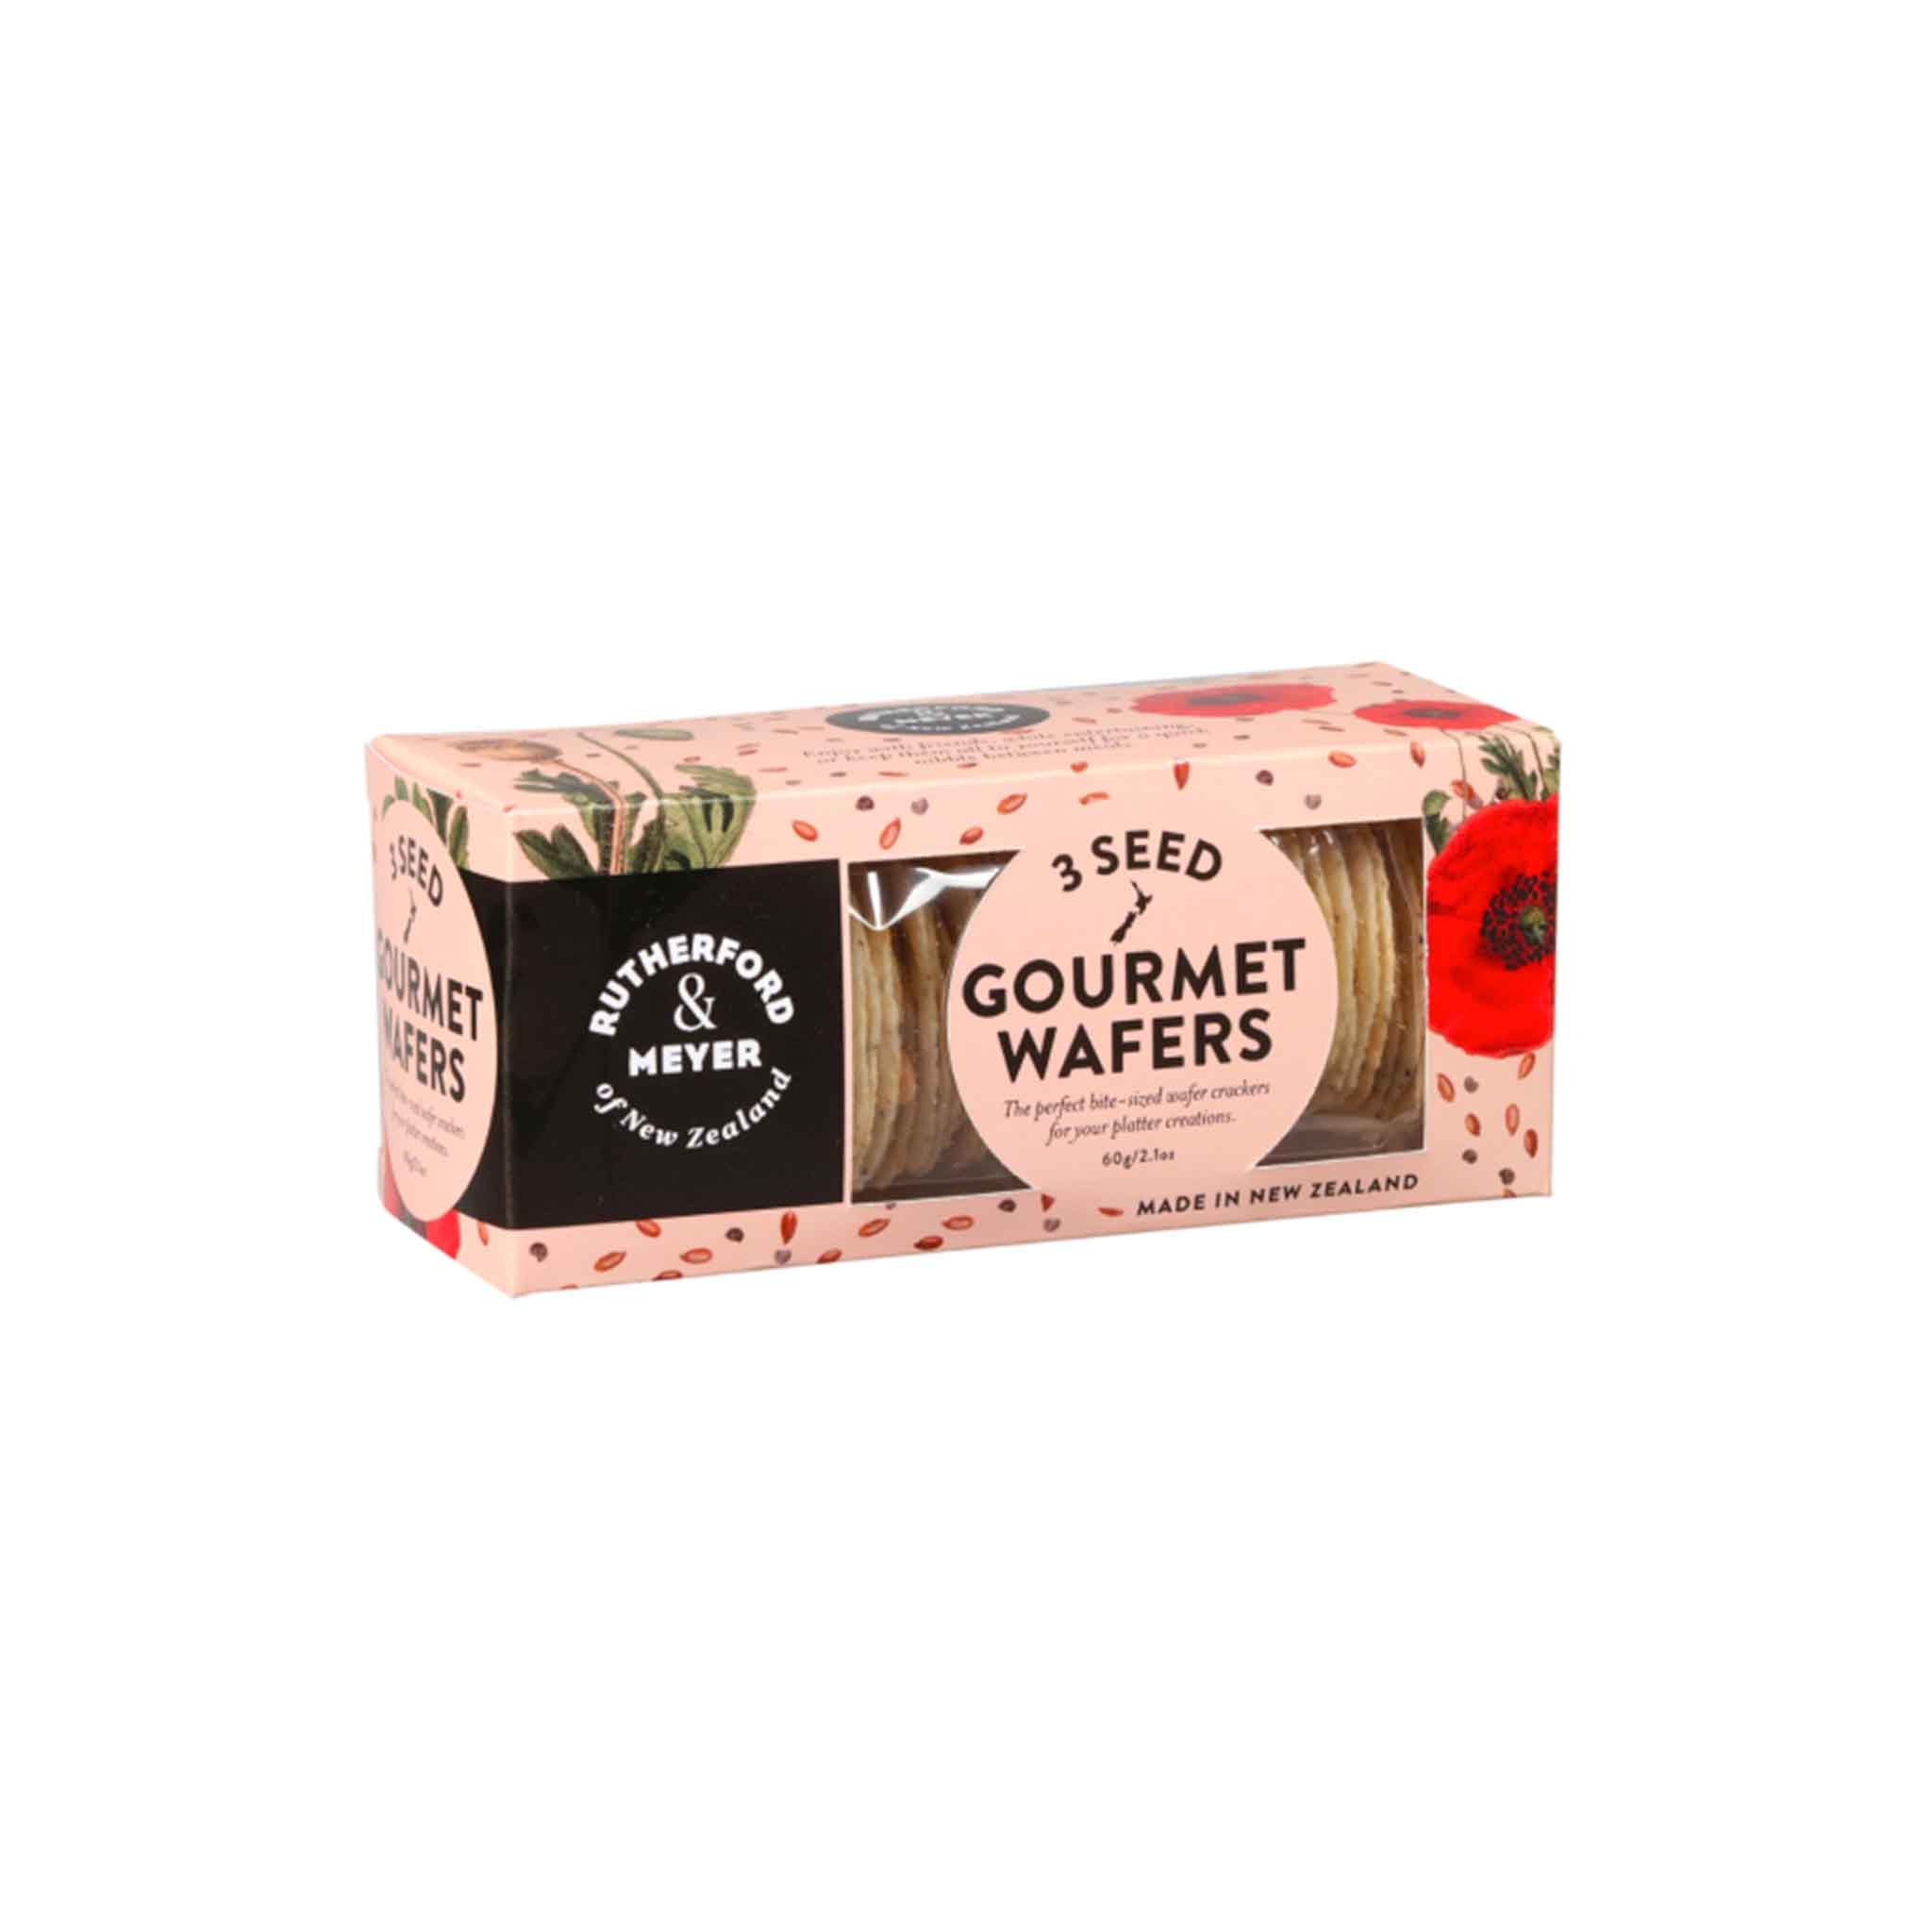 RUTHERFORD & MEYER GOURMET WAFERS 60g